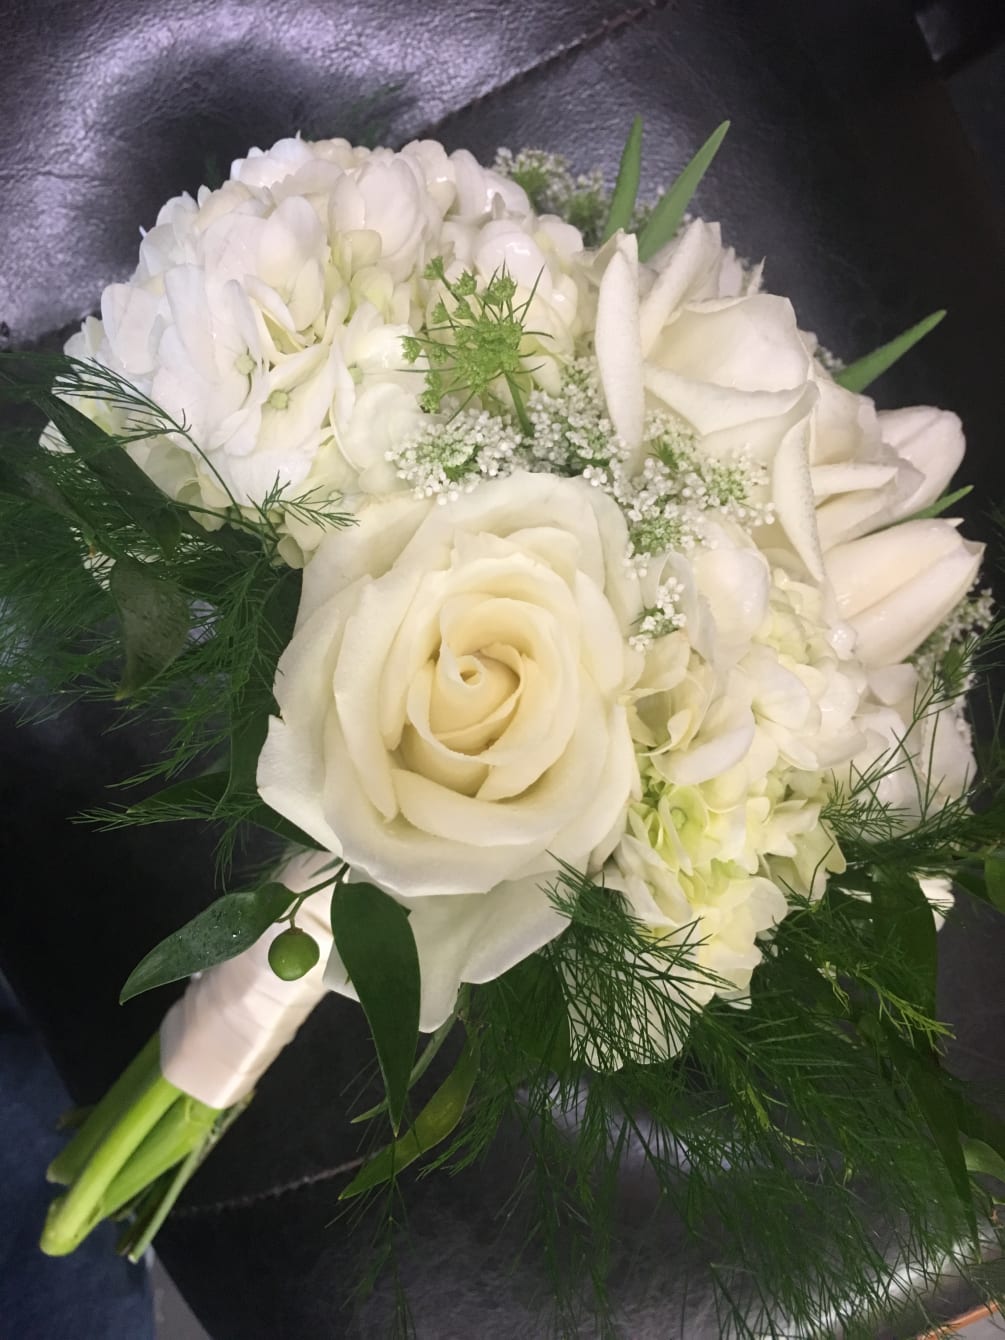 Creamy white flowers gathered in a nosegay. Flowers are accented with seasonal